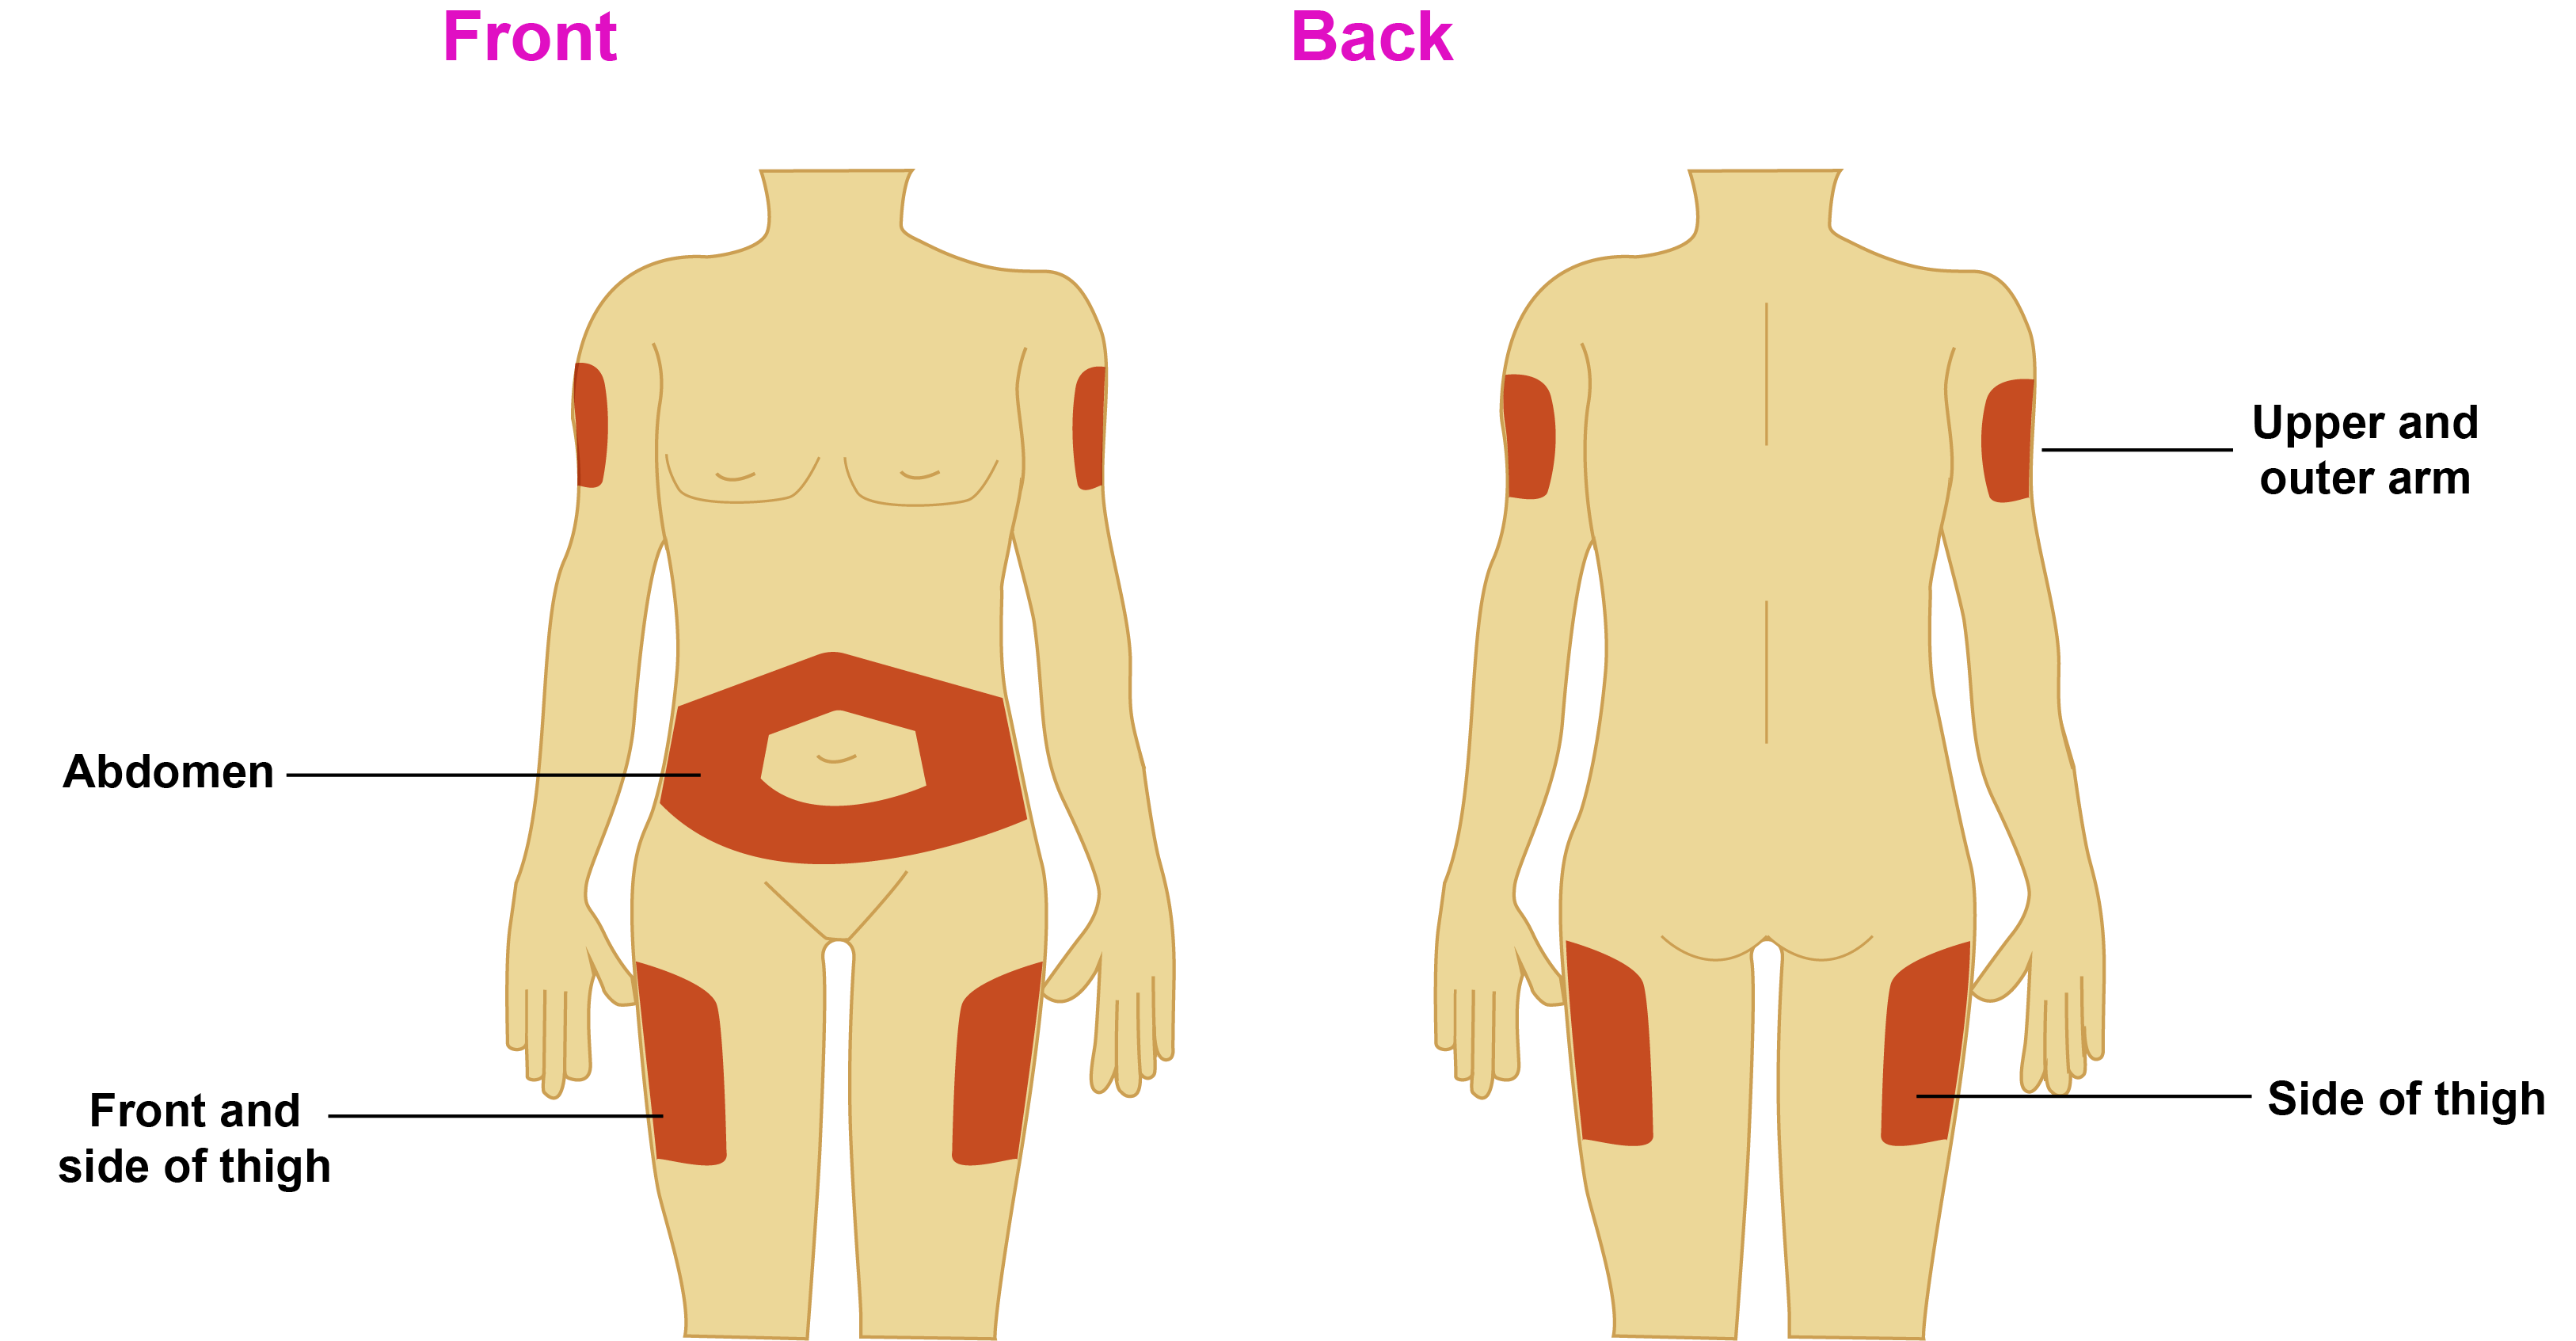 Image of Human Body - Front and back View